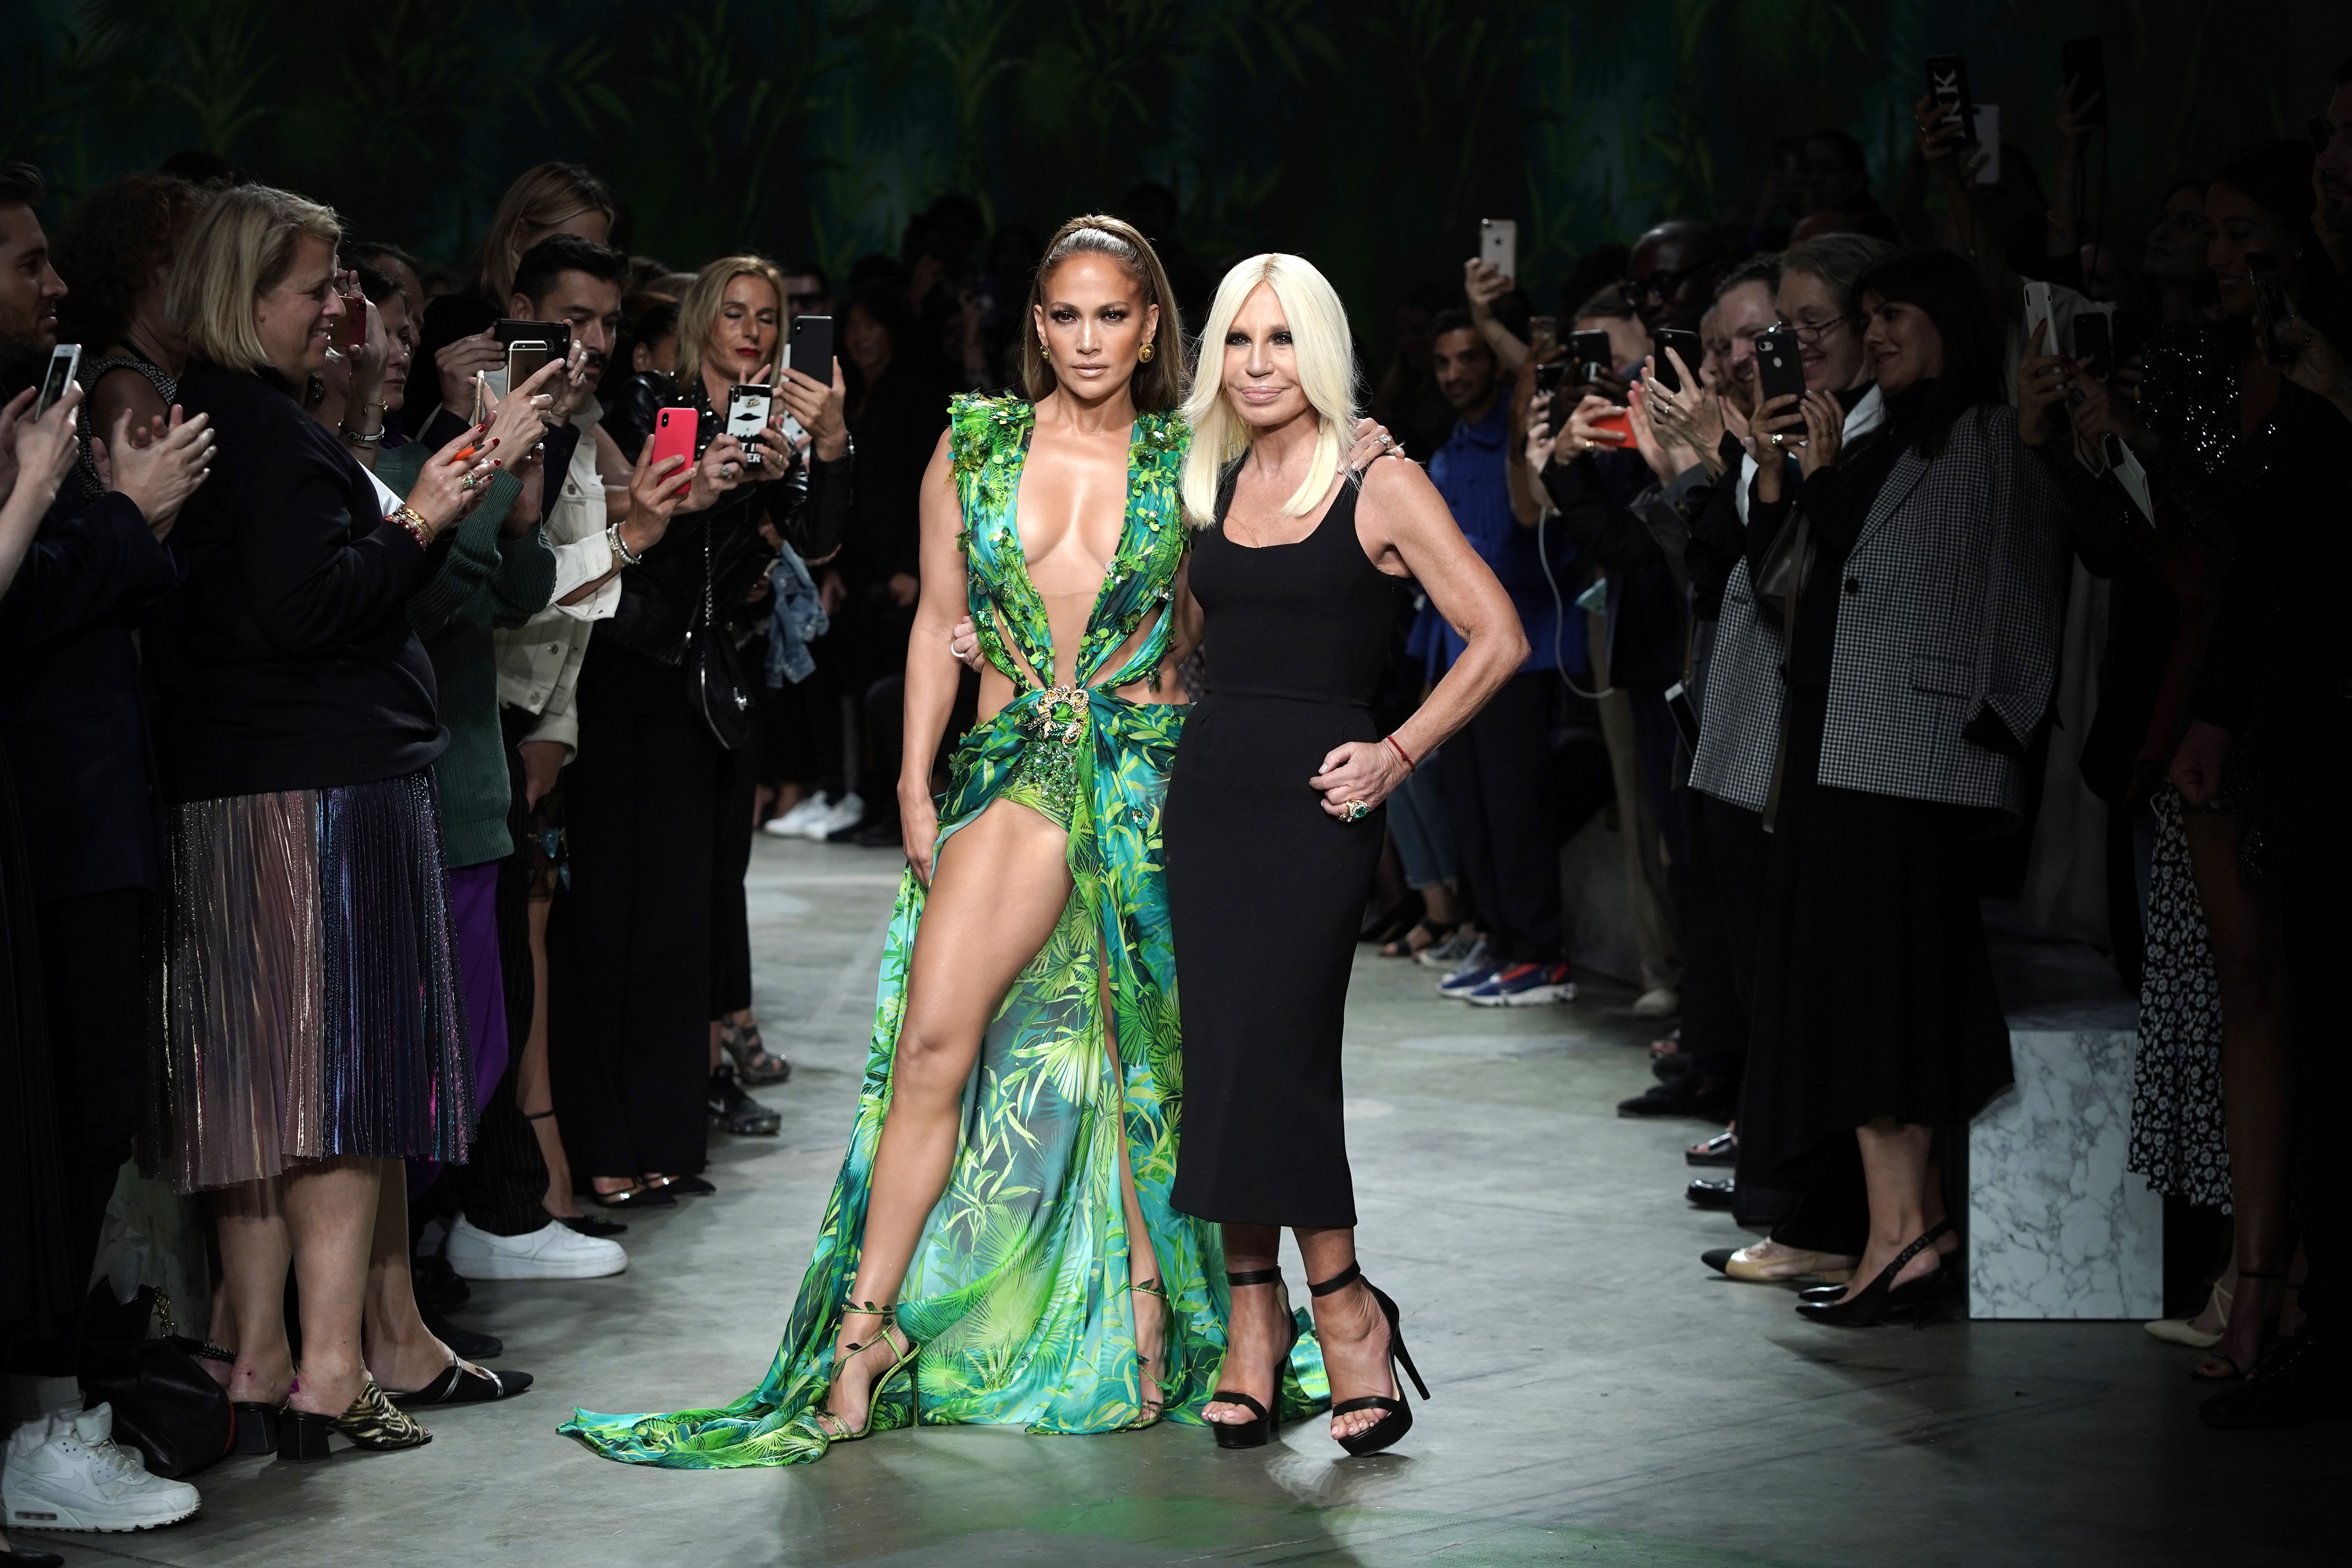 Donatella Versace on refusing to conform and new Hollywood show